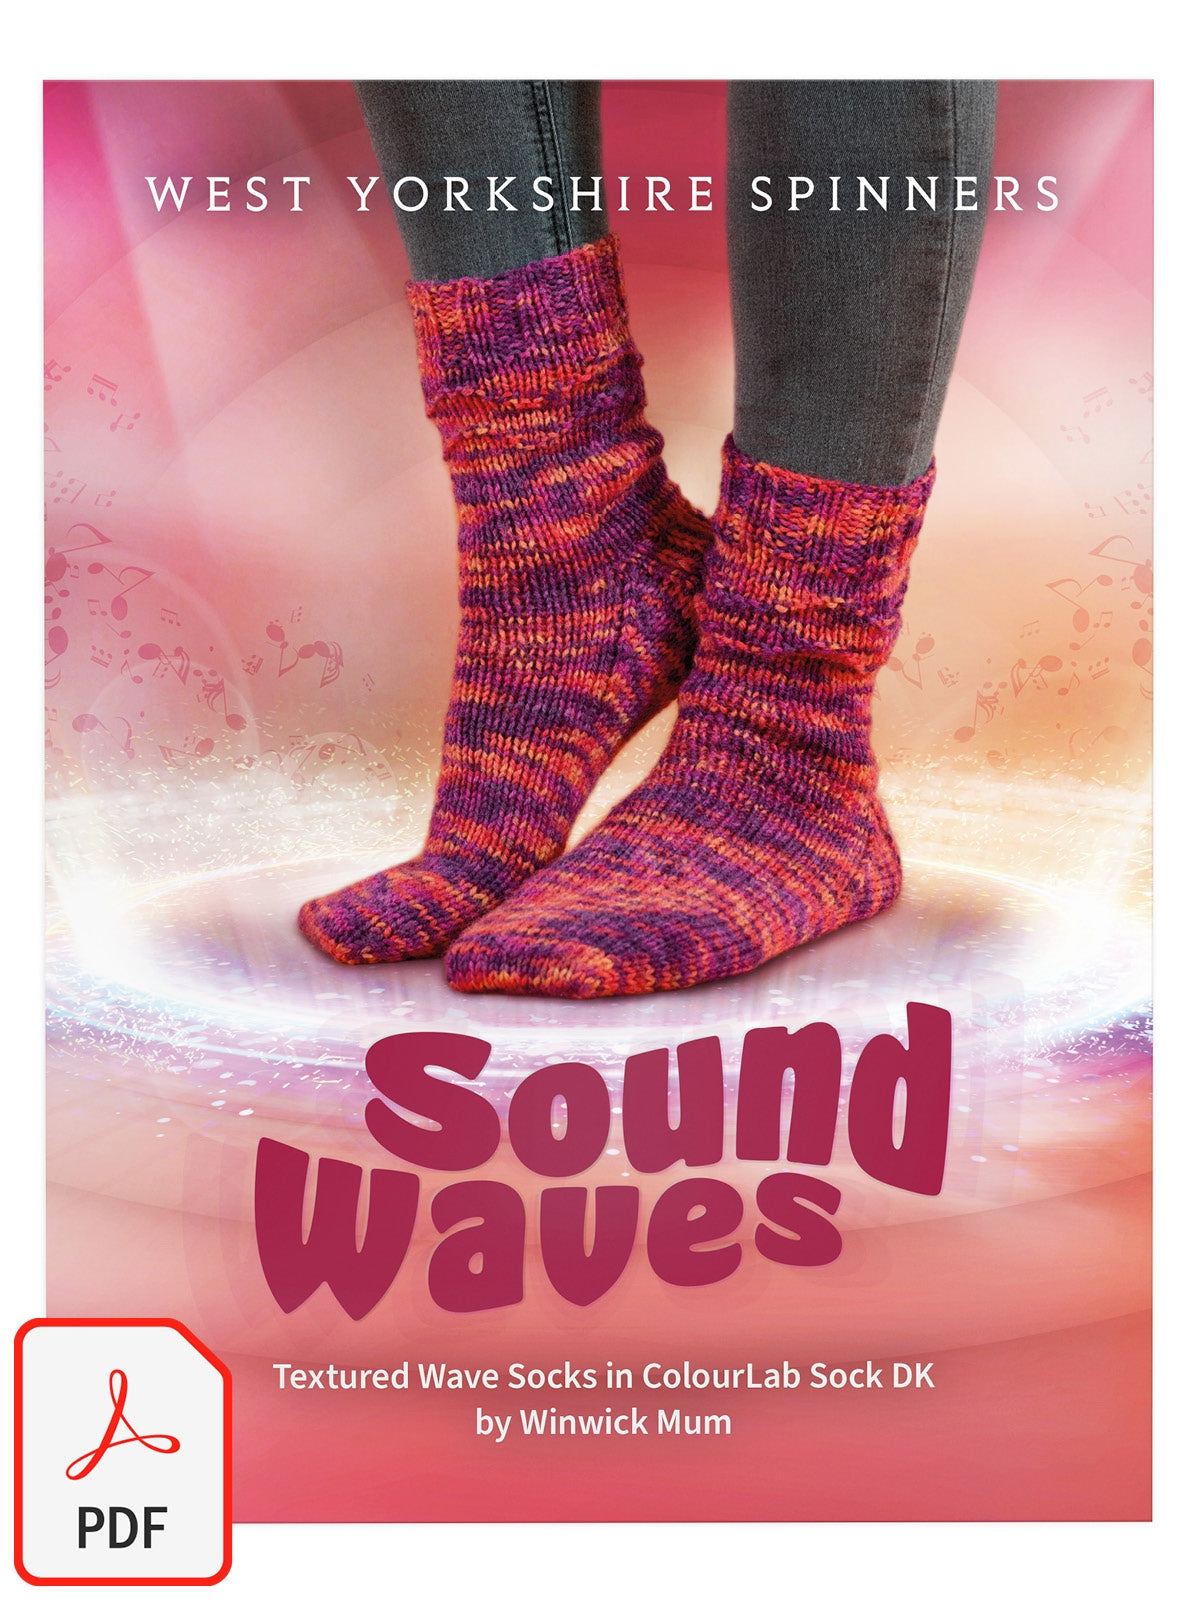 West Yorkshire Spinners ColourLab Sock DK - Sound Waves by Winwick Mum [Free Download]